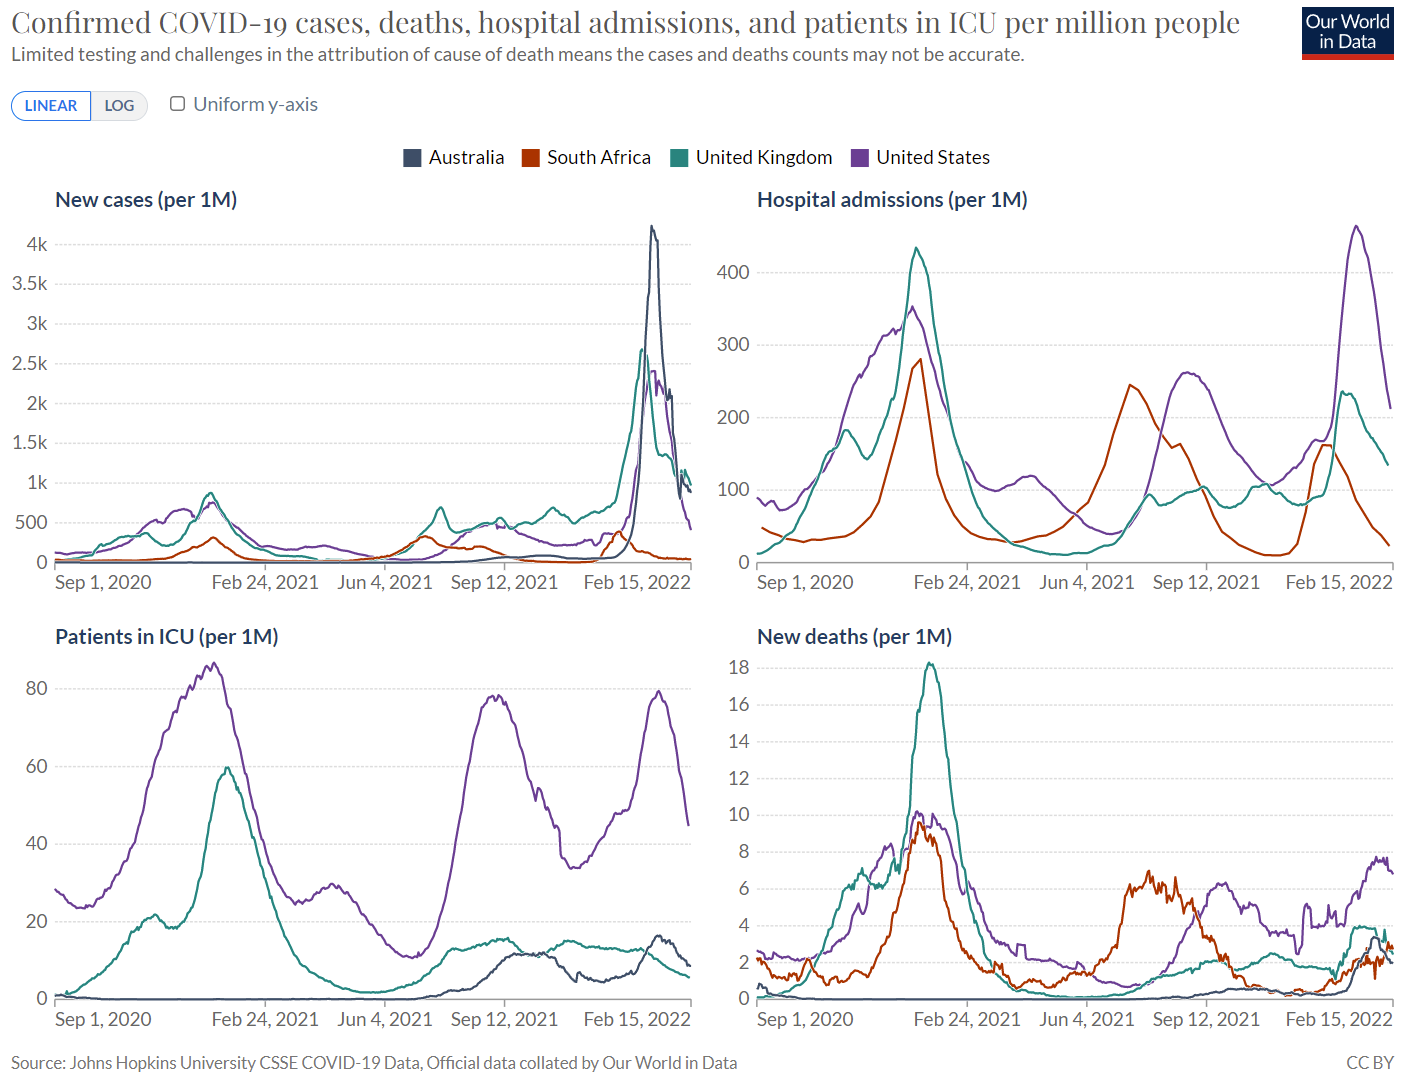 Covid-19 Cases, Hospitalizations and Deaths Compared